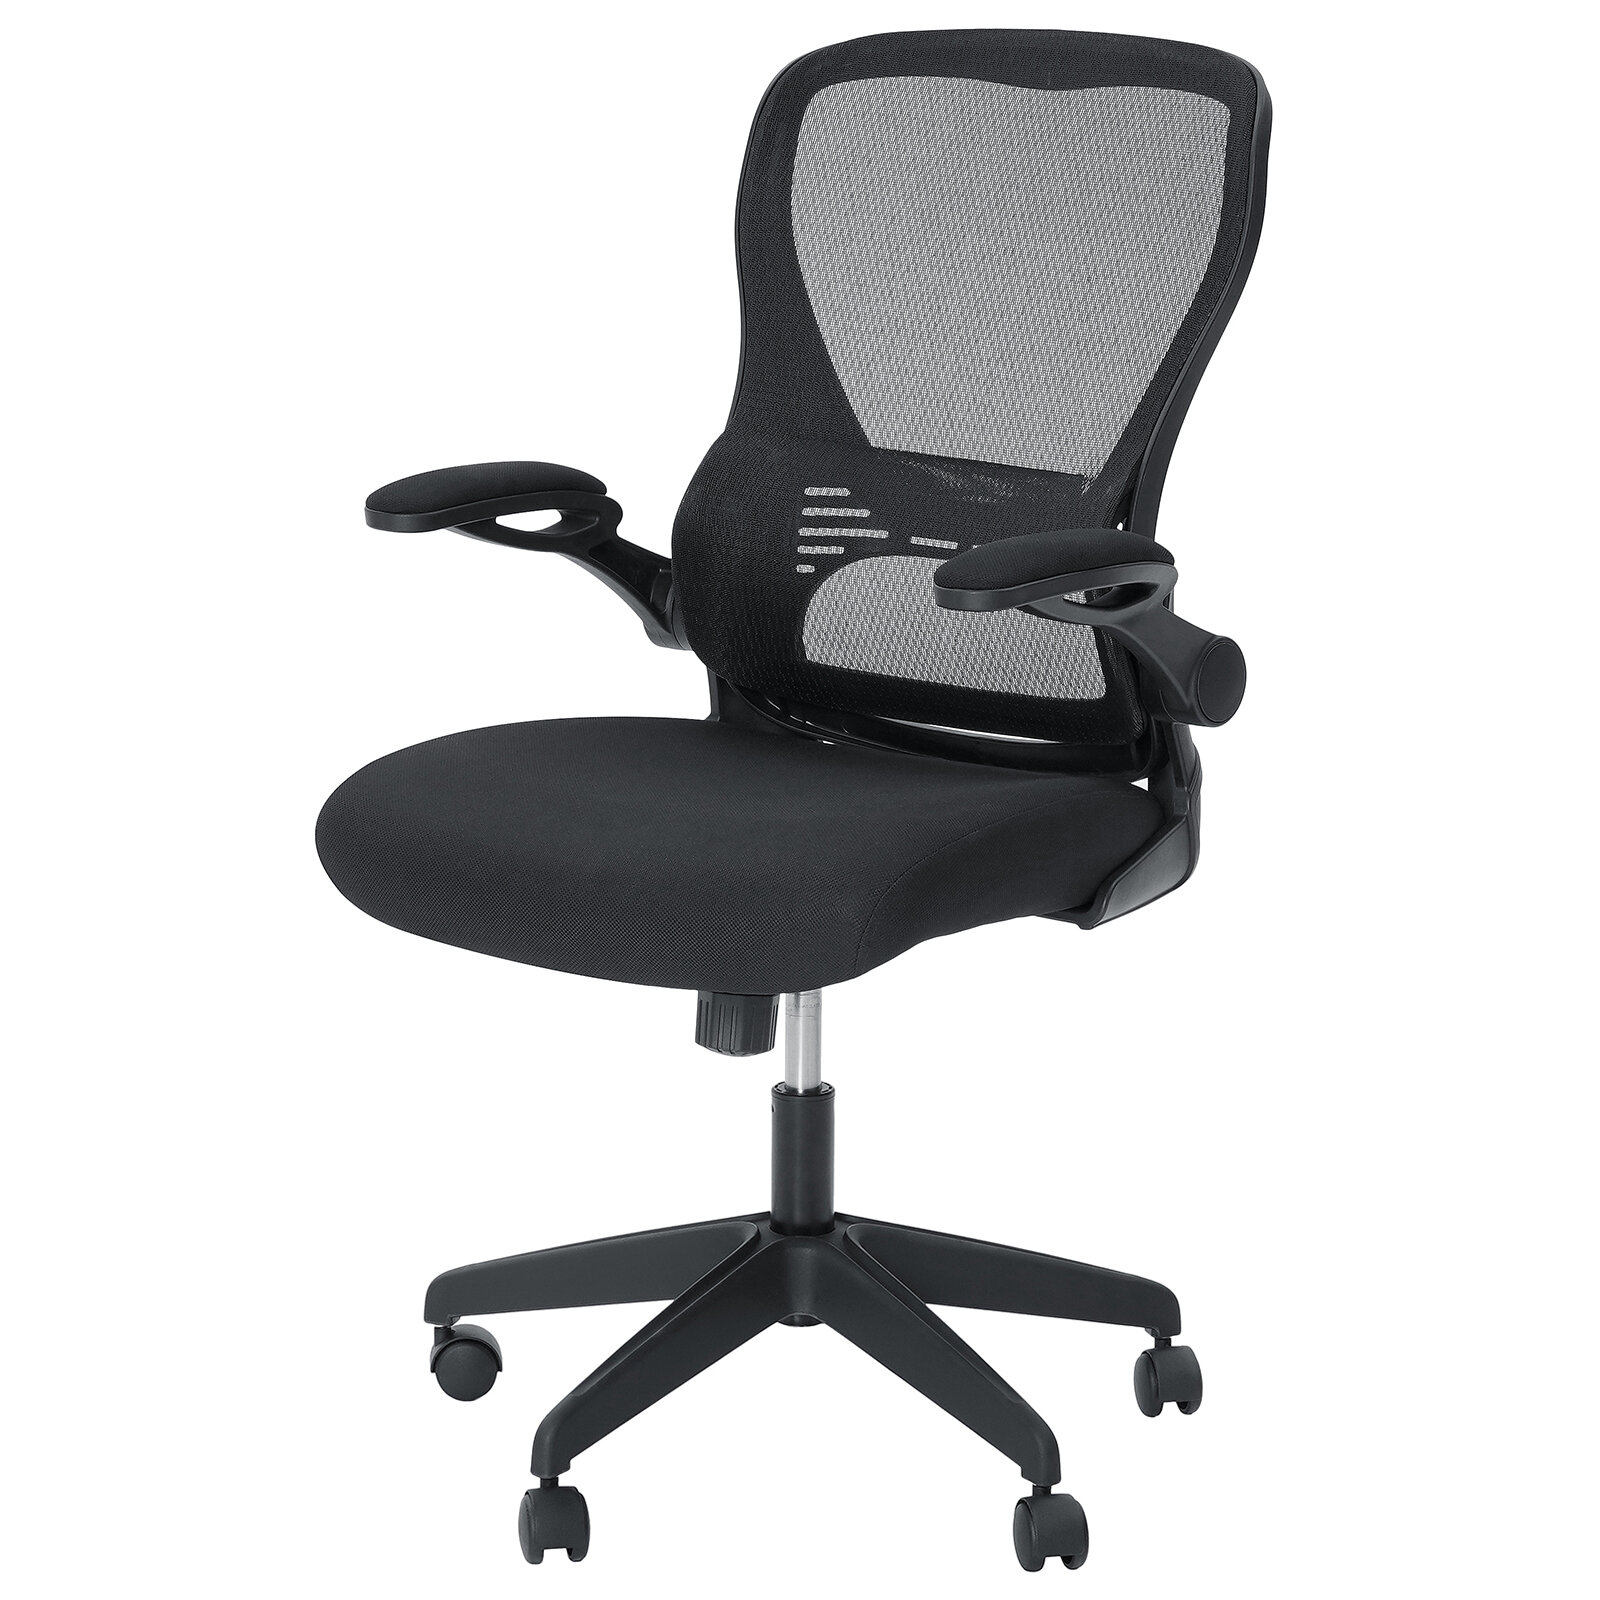 Hoffree Office Chair Ergonomic Desk Chair with Adjustable Height Lumbar Support High Back Mesh Computer Chair with Flip up Armrests